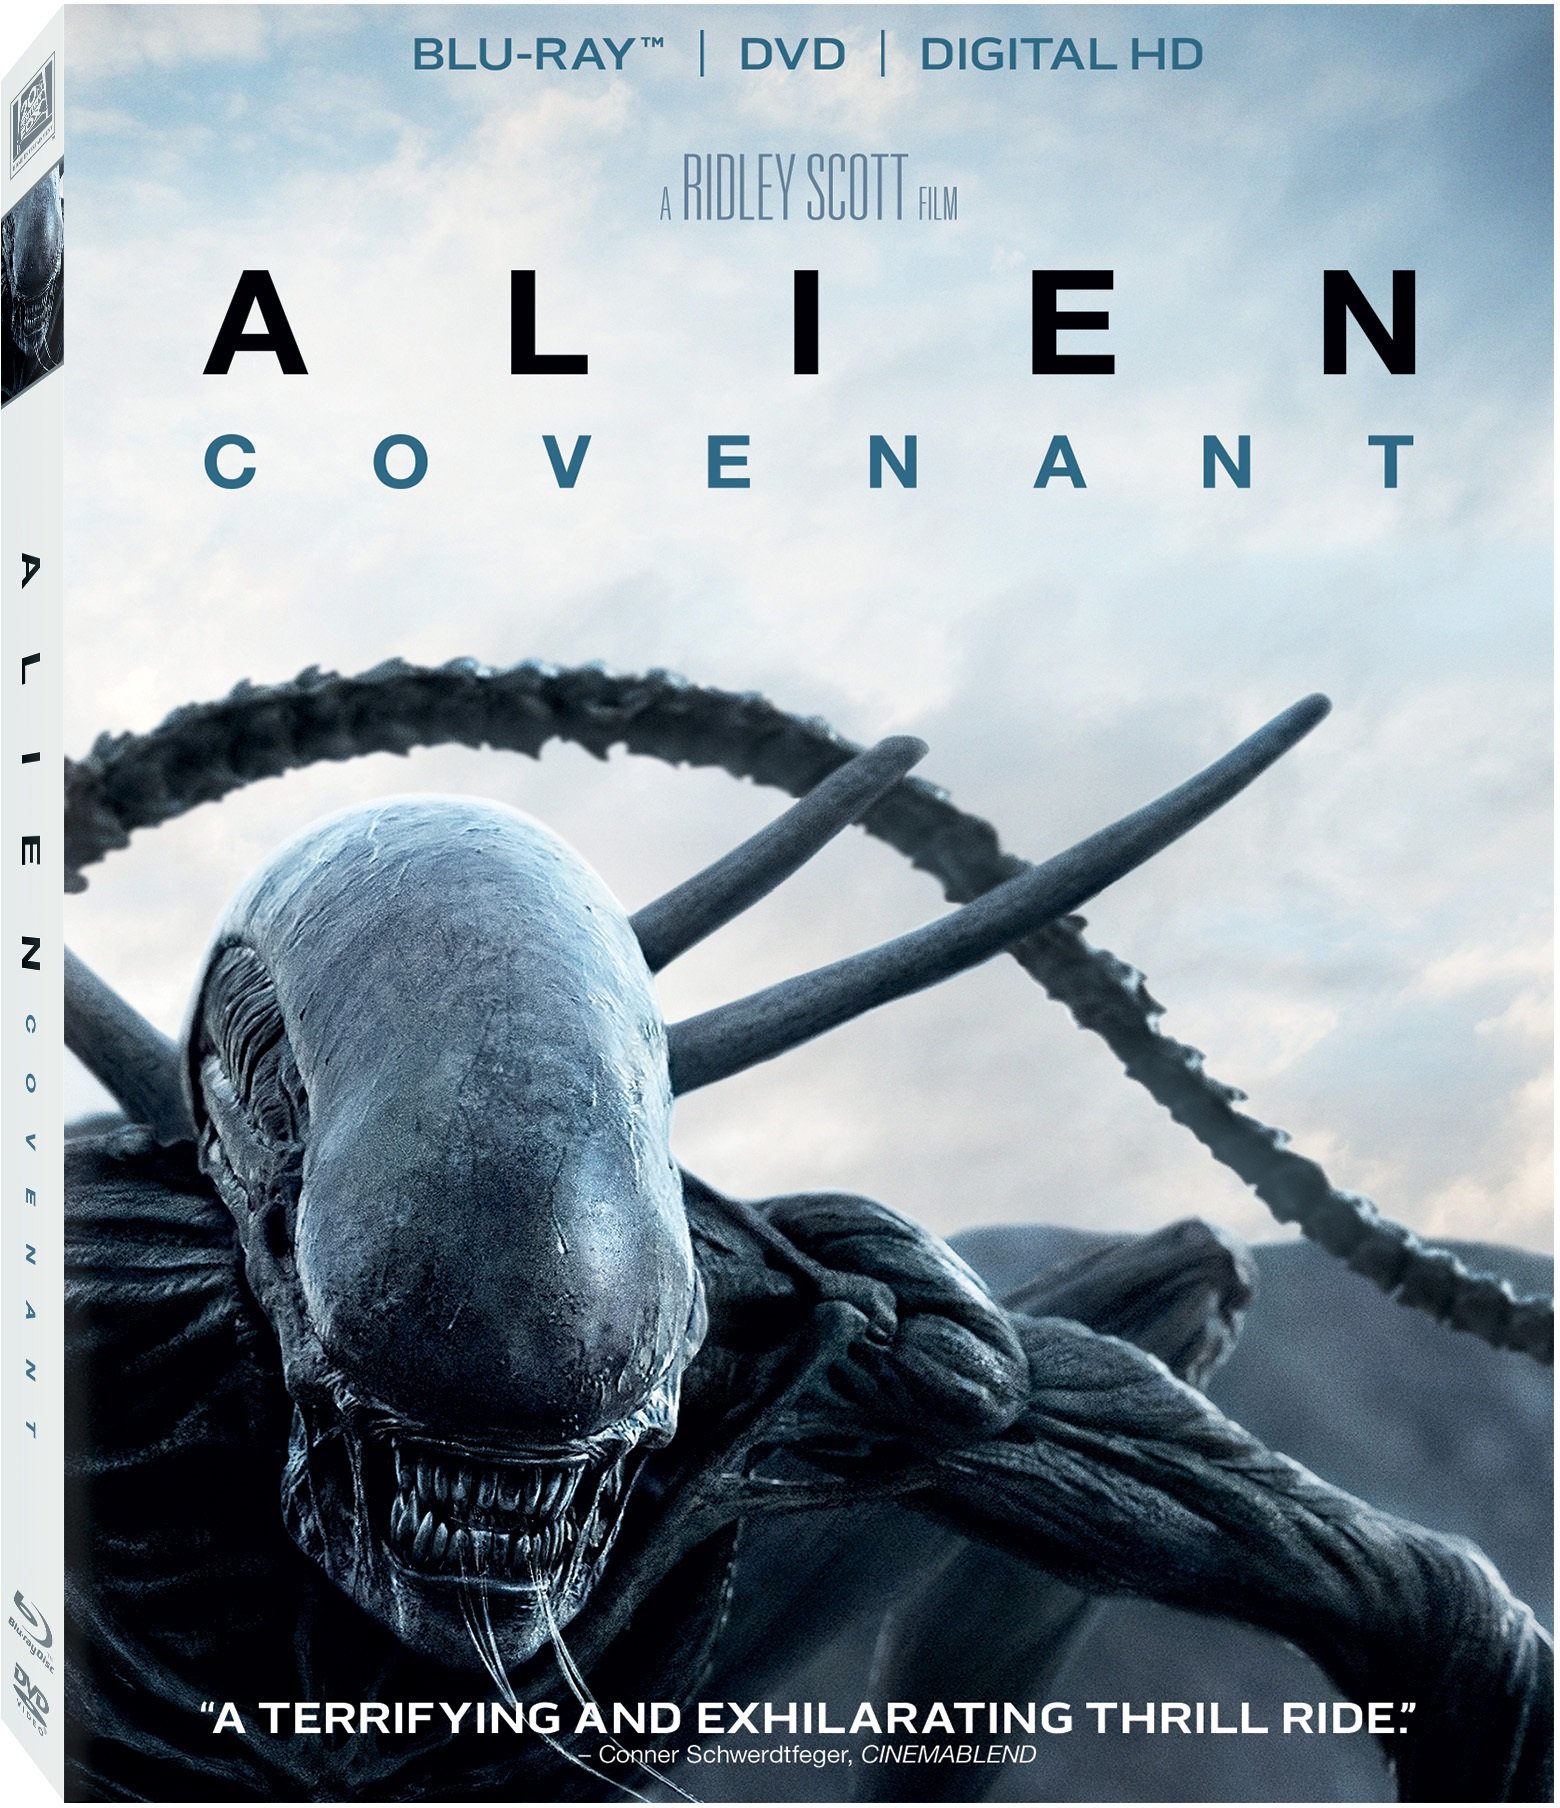 CHOOSE YOUR SIZE Alien Covenant Poster Film Movie Coming New May 2017 FREE P+P 